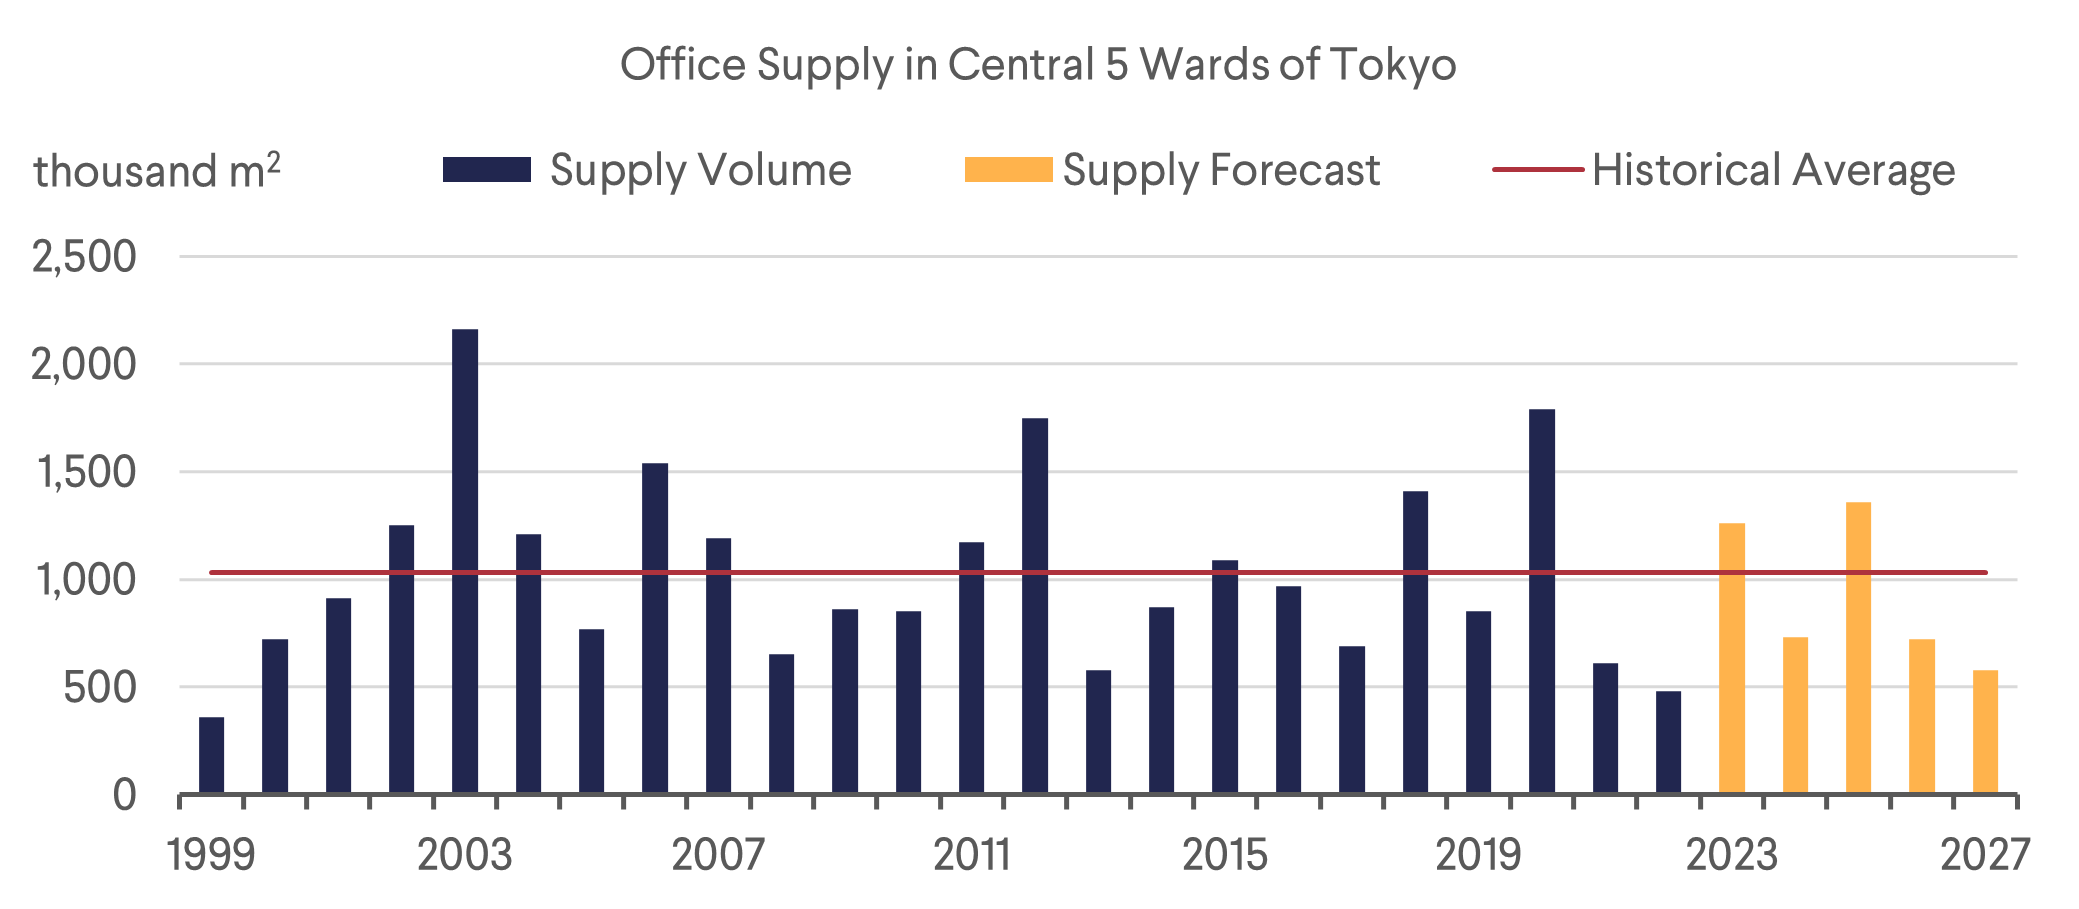 Office Supply in Central 5 Wards of Tokyo